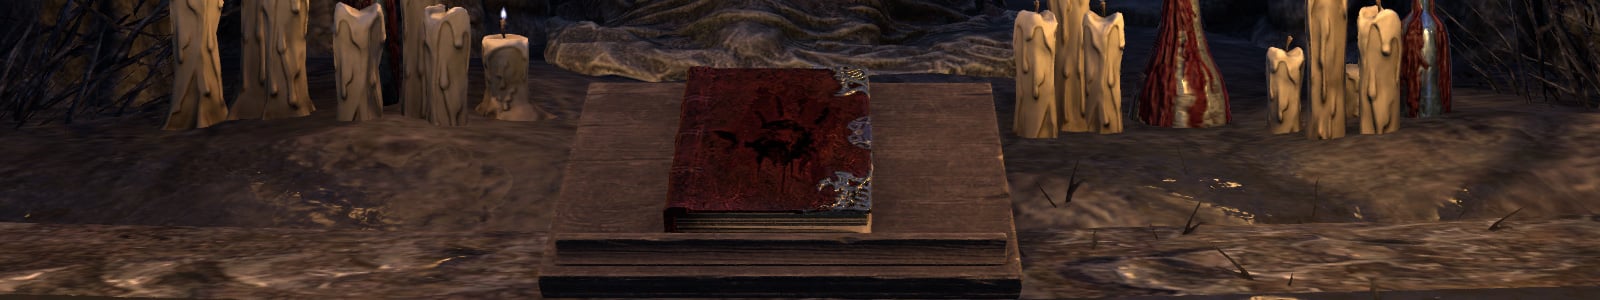 {"id":63,"title":{"en":"Litany of Blood Achievement Guide","de":"Litanei des Bluts - Errungenschaftsleitfaden"},"snippet":{"en":"Welcome to the Litany of Blood Achievement Guide in ESO. Here you will find all information you need to get the achievement for the Litany of Blood!","de":"Willkommen zum Litanei des Bluts-Errungenschaftsleitfaden in ESO. Hier findest du alle Informationen, die du ben\u00f6tigst, um die Errungenschaft f\u00fcr die Litanei des Bluts zu erhalten!"},"header_image_id":389,"created_at":"2021-11-02T13:41:40.000000Z","updated_at":"2022-03-29T12:31:21.000000Z","slug":{"de":"litany-of-blood-achievement-guide","en":"litany-of-blood-guide","fr":"litany-of-blood-achievement-guide"},"published":true,"category_id":14,"show_in_menu":true,"multi_page":false,"introduction":{"en":"Welcome to the Litany of Blood achievement guide for ESO (Elder Scrolls Online). In order to unlock the Litany of Blood achievement, you have to complete your first Sacrament Quest first. Nevusa will give you the Litany of Blood quest. You can find her in the Gold Coast Sanctuary in the room where Speaker Terenus resides in. You will receive the Litany of Blood book which contains cryptic clues about each of your targets. This Guide will help you find all the necessary targets to successfully complete the Litany of Blood Achievement.<img src=\"https:\/\/eso-hub.com\/storage\/guides\/zp1eb8tPSuYYZVFoeIWwnHFsi1WZkluI6lttc1EJ.jpg\" style=\"width: 400px;\" class=\"fr-fic fr-dib\">In order to complete this&nbsp;<a href=\"https:\/\/eso-hub.com\/en\/achievements\/litany-of-blood\">Litany of Blood Achievement<\/a>&nbsp;guide for ESO you need access to the&nbsp;<a href=\"https:\/\/eso-hub.com\/en\/zones\/gold-coast\">Gold Coast Zone<\/a><a href=\"https:\/\/eso-hub.com\/en\/zones\/murkmire\"><\/a>, that means you will need to have either the&nbsp;<a href=\"https:\/\/eso-hub.com\/en\/dlc\/dark-brotherhood\">Dark Brotherhood DLC<\/a><a href=\"https:\/\/eso-hub.com\/en\/dlc\/murkmire\"><\/a>&nbsp;or&nbsp;<a href=\"https:\/\/eso-hub.com\/en\/guides\/eso-plus-subscription\">ESO Plus<\/a>.<br><img src=\"\/storage\/guides\/EOpXnY9qgny21XlGhHFydIe6E3u96VKkVoLWhYRV.jpg\" style=\"width: 600px;\" class=\"fr-fic fr-dib\"><div>Tips<\/div><ul><li>All targets must be killed using the Blade of Woe, otherwise it does not count.<\/li><li dir=\"ltr\">The target will be in the city where it should be located. The target can walk through most of the city, so they are never at the same spot.<\/li><li dir=\"ltr\">The clues in the Litany of Blood are not literal, they have to be interpreted.<\/li><li dir=\"ltr\">&ldquo;You will know them by their eye.&rdquo; All targets will have one white eye, this is the dead giveaway you should be looking for once you find a target that matches the clues.<\/li><li dir=\"ltr\">You can start the quest after you have progressed to a certain point of the main story. Once that&rsquo;s the case you can talk to Nevusa.<\/li><li dir=\"ltr\">The people targeted can be killed before the quest is unlocked. If you do this, they will be added to their pedestal and marked as completed in the log when the quest is started.<\/li><li dir=\"ltr\">There are 15 pedestals, one for each alliance zone. Facing into the room, numbering them 1 to 15 beginning with the closest pedestal on the right and ending with the closest pedestal on the left, numbers 1-5 are the&nbsp;<a href=\"https:\/\/eso-hub.com\/en\/achievements\/category\/exploration\/aldmeri-dominion\">Aldmeri Dominion<\/a>&nbsp;zones in order, 6-10 are the&nbsp;<a href=\"https:\/\/eso-hub.com\/en\/achievements\/category\/exploration\/ebonheart-pact\">Ebonheart Pact<\/a>&nbsp;zones in order, and 11-15 are the&nbsp;<a href=\"https:\/\/eso-hub.com\/en\/achievements\/category\/exploration\/daggerfall-covenant\">Daggerfall Covenant<\/a>&nbsp;zones in order. This is a good way to track which kills are completed and which ones you are still missing, although checking the Achievement tab in your Journal will also tell you who is left.<\/li><li dir=\"ltr\">Thirteen of the targets are in the same towns as the respective Outlaws Refuges in their provinces, making it comparatively easy (so long as you can evade guards) to find your way there and pay off any bounty you might incur. The exceptions are in&nbsp;<a href=\"https:\/\/eso-hub.com\/en\/zones\/auridon\">Auridon<\/a> (Skywatch, rather than Vulkhel Guard) and&nbsp;<a href=\"https:\/\/eso-hub.com\/en\/zones\/malabal-tor\">Malabal Tor<\/a> (Vulkwasten, rather than Velyn Harbor).<\/li><li dir=\"ltr\">Be patient and follow you target to a secluded area, so that there's no witnesses.<\/li><\/ul><br><h2>Rewards Litany of Blood<\/h2><br>You will receive the&nbsp;<a href=\"https:\/\/eso-hub.com\/en\/collectibles\/cadaverous-assassin\">Cadaverous Assassin Polymorph<\/a>&nbsp;after having completed the Litany of Blood Achievement.<br><img src=\"\/storage\/guides\/R4dKQGQcZ7WfBU9BjqjUncyW84xJZrYbxVc6jr1u.jpg\" style=\"width: 600px;\" class=\"fr-fic fr-dib\"><br><h2>Targets<\/h2><br><table class=\"table table-striped\"><thead><tr><th>Target<\/th><th>Zone<\/th><th>Location<\/th><th>Clue<\/th><th>Picture<\/th><th>Map<\/th><\/tr><\/thead><tbody><tr><td>Cimalire<\/td><td>Auridon<\/td><td>Skywatch<\/td><td>From Skywatch, I offer she who reflects the heavens in her gaze and dress, drifting from dance to dance.<\/td><td><img src=\"\/storage\/guides\/EuKKhc719aj07SDUQCDhltCXG4sZvJjYIlC75tpv.jpg\" style=\"width: 300px;\" class=\"fr-fic fr-dib\"><\/td><td><img src=\"https:\/\/eso-hub.com\/storage\/guides\/TwH0yRs0i84f3fLwVHDBXtOTpHGE2kPqpLN4opON.jpg\" class=\"fr-fic fr-dib\" style=\"width: 600px;\"><br><br><\/td><\/tr><tr><td>Dirdelas<\/td><td>Grahtwood<\/td><td>Elden Root<\/td><td>From Elden Root, I offer he who is as aged and gnarled as the trees, his back bowed but not bent.<\/td><td><img src=\"\/storage\/guides\/s2ADODF1U74DDr0cDYIJ7VHbdNmwmDgSXJGiOdo1.jpg\" style=\"width: 300px;\" class=\"fr-fic fr-dib\"><\/td><td><img src=\"https:\/\/eso-hub.com\/storage\/guides\/DAKikySVPJbLaOY8Qcy29D5TK12DNn8E6ULr7LxH.jpg\" class=\"fr-fic fr-dib\" style=\"width: 600px;\"><\/td><\/tr><tr><td>Caraleth<\/td><td>Greenshade<\/td><td>Marbruk<\/td><td>From Marbruk, I offer she who surveys the market beneath an auburn veil and keeps silver close to her heart.<\/td><td><img src=\"\/storage\/guides\/x28PzhmODaVzpdqEwFnfgfr3lIqoxZffVCNpQNYj.jpg\" style=\"width: 300px;\" class=\"fr-fic fr-dib\"><\/td><td><img src=\"https:\/\/eso-hub.com\/storage\/guides\/7oGG0qqJSsYVA8MfbwcvqEdy1HCIdXlDaEW3VLjm.jpg\" class=\"fr-fic fr-dib\" style=\"width: 600px;\"><\/td><\/tr><tr><td>Sihada<\/td><td>Malabal Tor<\/td><td>Vulkwasten<\/td><td>From Vulkwasten, I offer she who sweeps away the seasons with straw and the swish of her tail.<\/td><td><img src=\"\/storage\/guides\/MxDRV0Ww0Oxos79pDOUF5iuZYcuIdWkyUl1B2SKP.jpg\" style=\"width: 300px;\" class=\"fr-fic fr-dib\"><\/td><td><img src=\"https:\/\/eso-hub.com\/storage\/guides\/fYwgciwBWmecaCmmR8sF4weD3psPZu9vIzedN6vE.jpg\" class=\"fr-fic fr-dib\" style=\"width: 600px;\"><\/td><\/tr><tr><td>Dablir<\/td><td>Reaper's March<\/td><td>Rawl'kha<\/td><td>From Rawl'kha, I offer he who clothes his stripes of brown with stripes of gold.<\/td><td><img src=\"\/storage\/guides\/KY1CqRyIobGu4dh0CGW5LVJe4nymZREZMEtUWdz5.jpg\" style=\"width: 300px;\" class=\"fr-fic fr-dib\"><\/td><td><img src=\"https:\/\/eso-hub.com\/storage\/guides\/aQOOCfQL19a6AByl1yV4frJ4TulAtjnV2dxEd64o.jpg\" class=\"fr-fic fr-dib\" style=\"width: 600px;\"><\/td><\/tr><tr><td>Dinor Girano<\/td><td>Stonefalls<\/td><td>Davon's Watch<\/td><td>From Davon's Watch, I offer he who is silver, ash, and fire, draped in copper filigree.<\/td><td><img src=\"\/storage\/guides\/wcV5NyAmCgE56zBhWHWvcWfxOeeMEnOu0a6G6nPX.jpg\" style=\"width: 300px;\" class=\"fr-fic fr-dib\"><\/td><td><img src=\"https:\/\/eso-hub.com\/storage\/guides\/i05o9mN1dMxRb3GLAIsczNJ9PxjpgMk23IntobW0.jpg\" class=\"fr-fic fr-dib\" style=\"width: 600px;\"><\/td><\/tr><tr><td>Cindiri Malas<\/td><td>Deshaan<\/td><td>Mournhold<\/td><td>From Mournhold, I offer she who marches beneath a red crest and wields winding steel.<\/td><td><img src=\"\/storage\/guides\/YsANFTSD78o51ZHsUL0jHWVSzEf1T4pJFO8EG933.jpg\" style=\"width: 300px;\" class=\"fr-fic fr-dib\"><\/td><td><img src=\"https:\/\/eso-hub.com\/storage\/guides\/AWtQOr112Le7RjzOkdJ0m8TNxp8MelVZTBlOe7p1.jpg\" class=\"fr-fic fr-dib\" style=\"width: 600px;\"><\/td><\/tr><tr><td>Gideelar<\/td><td>Shadowfen<\/td><td>Stormhold<\/td><td>From Stormhold, I offer she who is caked in mud but wears a halo of bone, bright and untouched by mire.<\/td><td><img src=\"\/storage\/guides\/gL5KeXl0zOsYiwbMjPOU4z2b91jjnErG0R5N5QJi.jpg\" style=\"width: 300px;\" class=\"fr-fic fr-dib\"><\/td><td><img src=\"https:\/\/eso-hub.com\/storage\/guides\/pV2Mg8VShRND7ysVIcYV73BVZdhZlvOMSLi0pToU.jpg\" class=\"fr-fic fr-dib\" style=\"width: 600px;\"><\/td><\/tr><tr><td>Hakida<\/td><td>Eastmarch<\/td><td>Windhelm<\/td><td>From Windhelm, I offer she who bears time at her waist, but for whom age has not robbed her golden crown.<\/td><td><img src=\"\/storage\/guides\/Sdz5rIsqllHcXVslFLxzB5UEPZSOxRg1d280ODo4.jpg\" style=\"width: 300px;\" class=\"fr-fic fr-dib\"><\/td><td><img src=\"https:\/\/eso-hub.com\/storage\/guides\/2I1EVvTpMjVPvGq68i5W1zuznmPgkyy3rHLV3UTb.jpg\" class=\"fr-fic fr-dib\" style=\"width: 600px;\"><\/td><\/tr><tr><td>Eldfyr<\/td><td>The Rift<\/td><td>Riften<\/td><td>From Riften, I offer he whose arms are coiled and stained with the ink and weeds of the sea.<\/td><td><img src=\"\/storage\/guides\/utJoG8gi04kUhf7Ffjbx53gZWIK6Q8SDOtOHTHt7.jpg\" style=\"width: 250px;\" class=\"fr-fic fr-dib\"><\/td><td><img src=\"https:\/\/eso-hub.com\/storage\/guides\/0VXAgD08bLkHPTScWFk3lSXhttfotqoj7ZevEb3M.jpg\" class=\"fr-fic fr-dib\" style=\"width: 600px;\"><\/td><\/tr><tr><td>Cesarel Hedier<\/td><td>Glenumbra<\/td><td>Daggerfall<\/td><td>From Daggerfall, I offer he whose dress is as cool as his demeanor and pate as barren as his heart.<\/td><td><img src=\"\/storage\/guides\/Lug8Eh2UEAHBYgMHadlSpTsVdPqXdwnPNM3ZIRJb.jpg\" style=\"width: 300px;\" class=\"fr-fic fr-dib\"><\/td><td><img src=\"https:\/\/eso-hub.com\/storage\/guides\/BTRUvE7l0DbNzG3tdHwxjsDSR3BrOYYpKVM5e0X0.jpg\" class=\"fr-fic fr-dib\" style=\"width: 600px;\"><\/td><\/tr><tr><td>Alix Edette<\/td><td>Stormhaven<\/td><td>Wayrest<\/td><td>From Wayrest, I offer she who peers from behind a crimson curtain and marred her face to hide her nature.<\/td><td><img src=\"\/storage\/guides\/xNGMIjx5m2hX2ZjwCwiIt5ZzfDgusmzxNVijnsQE.jpg\" style=\"width: 300px;\" class=\"fr-fic fr-dib\"><\/td><td><img src=\"https:\/\/eso-hub.com\/storage\/guides\/d8EJ8mNIXOlRj7SfCQCNQGJzB9CLAdNspouHnCQ4.jpg\" class=\"fr-fic fr-dib\" style=\"width: 600px;\"><\/td><\/tr><tr><td>Bolaag<\/td><td>Rivenspire<\/td><td>Shornhelm<\/td><td>From Shornhelm, I offer she who greets death as a sister, her smile joyless and unflinching.<\/td><td><img src=\"\/storage\/guides\/jSyMhlgwkRP0gaJqWGOBOTFQhoPetdpCaMy5Rdb6.jpg\" style=\"width: 300px;\" class=\"fr-fic fr-dib\"><\/td><td><img src=\"https:\/\/eso-hub.com\/storage\/guides\/VjkW1o5j5z6r0kPmfSONmuxBoZ89a55nWMAdGnUL.jpg\" class=\"fr-fic fr-dib\" style=\"width: 600px;\"><\/td><\/tr><tr><td>Ebrayd<\/td><td>Alik'r Desert<\/td><td>Sentinel<\/td><td>From Sentinel, I offer he who leaves a trail of neat black ropes dangling over a golden cage.<\/td><td><img src=\"\/storage\/guides\/HYUoN1sFbDhGE6LHaGXWS6MvfgfrlHFP6O9xB8QZ.jpg\" style=\"width: 300px;\" class=\"fr-fic fr-dib\"><\/td><td><img src=\"https:\/\/eso-hub.com\/storage\/guides\/XIGX2ClfmCtvUk0g9UsZJN0jz2UrSBhyXvtgl9JT.jpg\" class=\"fr-fic fr-dib\" style=\"width: 600px;\"><\/td><\/tr><tr><td>Berea<\/td><td>Bangkorai<\/td><td>Evermore<\/td><td>From Evermore, I offer she whose heart bears many scars, but does not fear to wear them proudly.<\/td><td><img src=\"\/storage\/guides\/IaDGA0YwDracLeQFtGjsZElYKVWxFjLFHUGExwj3.jpg\" style=\"width: 400px;\" class=\"fr-fic fr-dib\"><\/td><td><img src=\"https:\/\/eso-hub.com\/storage\/guides\/Qf1huegue2UirXZn4OjEkWX66Jrdz99W0uUqppgk.jpg\" class=\"fr-fic fr-dib\" style=\"width: 600px;\"><\/td><\/tr><\/tbody><\/table><br><br>Here's also a video walkthrough of the Litany of Blood Achievement Guide in ESO if you prefer that!<br><span class=\"fr-video fr-deletable fr-fvc fr-dvb fr-draggable\" contenteditable=\"false\" draggable=\"true\"><iframe src=\"https:\/\/www.youtube.com\/embed\/EiBaymxZkJM?&amp;wmode=opaque&amp;rel=0\" allowfullscreen=\"\" class=\"fr-draggable\" width=\"640\" height=\"360\" frameborder=\"0\"><\/iframe><\/span>","de":"Willkommen beim Leitfaden zur Errungenschaft \"Litanei des Bluts\" f&uuml;r ESO (Elder Scrolls Online). Um die Errungenschaft \"Litanei des Bluts\" freizuschalten, musst du zuerst deine erste Sakramentquest abschlie&szlig;en. Nevusa wird dir die Quest \"Litanei des Bluts\" geben. Diese befindet sich in der Goldk&uuml;sten-Zuflucht, in dem Raum, in dem Sprecher Terenus residiert. Du erh&auml;ltst das Buch, das kryptische Hinweise zu jedem deiner Ziele enth&auml;lt. Dieser Leitfaden wird dir helfen, alle notwendigen Ziele zu finden, um die Errungenschaft \"Litanei des Bluts\" erfolgreich abzuschlie&szlig;en.<br><br><img src=\"https:\/\/eso-hub.com\/storage\/guides\/zp1eb8tPSuYYZVFoeIWwnHFsi1WZkluI6lttc1EJ.jpg\" style=\"width: 400px;\" class=\"fr-fic fr-dib\">Um diesen Leitfaden f&uuml;r die \"Litanei des Bluts-Errungenschaft\" f&uuml;r ESO abzuschlie&szlig;en, ben&ouml;tigst du Zugang zum Goldk&uuml;stengebiet, was bedeutet, dass du entweder den DLC \"<a href=\"https:\/\/eso-hub.com\/de\/dlc\/dark-brotherhood\" rel=\"noopener noreferrer\" target=\"_blank\">Dunkle Bruderschaft<\/a>\", oder&nbsp;<a href=\"https:\/\/eso-hub.com\/de\/guides\/eso-plus-mitgliedschaft\" rel=\"noopener noreferrer\" target=\"_blank\">ESO Plus<\/a>&nbsp;haben musst.<br><img src=\"https:\/\/eso-hub.com\/storage\/guides\/EOpXnY9qgny21XlGhHFydIe6E3u96VKkVoLWhYRV.png\" style=\"width: 600px;\" class=\"fr-fic fr-dib\"><div>Tipps<\/div><ul><li>Alle Ziele m&uuml;ssen mit der Leidensklinge get&ouml;tet werden, sonst wird es nicht gez&auml;hlt.<\/li><li dir=\"ltr\">Das Ziel befindet sich in der angegebenen Stadt. Die Zielperson kann durch den gr&ouml;&szlig;ten Teil der Stadt laufen, so dass es sich nie am selben Ort befindet.<\/li><li dir=\"ltr\">Die Hinweise in der Litanei des Bluts sind nicht w&ouml;rtlich zu nehmen, sondern m&uuml;ssen interpretiert werden.<\/li><li dir=\"ltr\">\"An ihren Augen wird man sie erkennen.\" Alle Zielpersonen haben ein wei&szlig;es Auge. Das ist der eindeutige Hinweis, nach dem du suchen solltest, sobald du eine Zielperson gefunden hast, die den Hinweisen entspricht.<\/li><li dir=\"ltr\">Du kannst das Abenteuer beginnen, wenn du in der Hauptgeschichte einen bestimmten Punkt erreicht hast. Sobald das der Fall ist, kannst du mit Nevusa sprechen.<\/li><li dir=\"ltr\">Die Zielpersonen k&ouml;nnen get&ouml;tet werden, bevor die Quest freigeschaltet wird. Wenn du dies tust, werden sie zu ihrem Sockel hinzugef&uuml;gt und im Protokoll als abgeschlossen markiert, sobald die Quest gestartet wurde.<\/li><li dir=\"ltr\">Es gibt 15 Podeste, eines f&uuml;r jede Allianzzone. Schaue in den Raum und nummeriere sie von 1 bis 15, beginnend mit dem n&auml;chstgelegenen Podest auf der rechten Seite und endend mit dem n&auml;chstgelegenen Podest auf der linken Seite. Die Nummern 1-5 sind die Zonen des&nbsp;<a href=\"https:\/\/eso-hub.com\/de\/achievements\/category\/erkunden\/aldmeri-dominion\" rel=\"noopener noreferrer\" target=\"_blank\">Aldmeri-Dominions<\/a>, dann 6-10 die Zonen des&nbsp;<a href=\"https:\/\/eso-hub.com\/de\/achievements\/category\/erkunden\/aldmeri-dominion\" rel=\"noopener noreferrer\" target=\"_blank\">Ebenherz-Paktes<\/a>&nbsp;und 11-15 sind die Zonen des&nbsp;<a href=\"https:\/\/eso-hub.com\/de\/achievements\/category\/erkunden\/aldmeri-dominion\" rel=\"noopener noreferrer\" target=\"_blank\">Dolchsturz-Paktes<\/a>. Dies ist ein guter Weg, um herauszufinden, welche Morde abgeschlossen wurden und welche noch fehlen, obwohl ein Blick auf den Errungenschafts-Reiter in deinem Journal dir das auch verr&auml;t.<\/li><li dir=\"ltr\">Dreizehn der Ziele befinden sich in denselben St&auml;dten wie die jeweiligen Zufluchtsorte der Ge&auml;chteten in ihren Provinzen, so dass es vergleichsweise einfach ist - solange man den Wachen ausweichen kann -, den Weg dorthin zu finden und ein eventuelles Kopfgeld zu bezahlen. Die Ausnahmen sind&nbsp;<a href=\"https:\/\/eso-hub.com\/de\/zones\/auridon\" rel=\"noopener noreferrer\" target=\"_blank\"> Auridon<\/a> (Himmelswacht, statt Vulkhelwacht) und&nbsp;<a href=\"https:\/\/eso-hub.com\/en\/zones\/malabal-tor\" rel=\"noopener noreferrer\" target=\"_blank\">Malabal Tor<\/a> (Vulkwasten, statt Velynhafen).<\/li><li dir=\"ltr\">Sei geduldig und folge deiner Zielperson an einen abgelegenen Ort, damit es keine Zeugen gibt.<\/li><\/ul><br><h2>Belohnungen f&uuml;r die Litanei des Bluts<\/h2><br>Du erh&auml;ltst die&nbsp;<a href=\"https:\/\/eso-hub.com\/de\/collectibles\/ausgezehrter-assassine\" rel=\"noopener noreferrer\" target=\"_blank\">Ausgezehrter Assasine-Verwandlung<\/a>, nachdem du die Errungenschaft \"Litanei des Blutss\" abgeschlossen hast.<br><img src=\"https:\/\/eso-hub.com\/storage\/guides\/R4dKQGQcZ7WfBU9BjqjUncyW84xJZrYbxVc6jr1u.png\" style=\"width: 600px;\" class=\"fr-fic fr-dib\"><br><h2>Ziele<\/h2><br><table class=\"table table-striped\"><thead><tr><th>Ziel<br><\/th><th>Gebiet<br><\/th><th>Ort<br><\/th><th>Hinweis<br><\/th><th>Bild<br><\/th><th>Karte<br><\/th><\/tr><\/thead><tbody><tr><td>Cimalire<\/td><td>Auridon<\/td><td>Himmelswacht<br><\/td><td>Aus Himmelswacht bring ich Dir jene dar,<br>deren Blick und Gewand den Himmel birgt,<br>w&auml;hrend sie von Tanz zu Tanz schwebt.<br><\/td><td><img src=\"https:\/\/eso-hub.com\/storage\/guides\/EuKKhc719aj07SDUQCDhltCXG4sZvJjYIlC75tpv.png\" style=\"width: 300px;\" class=\"fr-fic fr-dib\"><\/td><td><img src=\"https:\/\/eso-hub.com\/storage\/guides\/TwH0yRs0i84f3fLwVHDBXtOTpHGE2kPqpLN4opON.jpg\" class=\"fr-fic fr-dib\" style=\"width: 600px;\"><br><br><\/td><\/tr><tr><td>Dirdelas<\/td><td>Grahtwald<\/td><td>Eldenwurz<\/td><td>Aus Eldenwurz bring ich Dir jenen dar,<br>der alt und knorrig wie ein Baum,<br>doch stets ein gespannter Bogen.<br><\/td><td><img src=\"https:\/\/eso-hub.com\/storage\/guides\/s2ADODF1U74DDr0cDYIJ7VHbdNmwmDgSXJGiOdo1.png\" style=\"width: 300px;\" class=\"fr-fic fr-dib\"><\/td><td><img src=\"https:\/\/eso-hub.com\/storage\/guides\/DAKikySVPJbLaOY8Qcy29D5TK12DNn8E6ULr7LxH.jpg\" class=\"fr-fic fr-dib\" style=\"width: 600px;\"><\/td><\/tr><tr><td>Caraleth<\/td><td>Gr&uuml;nschatten<\/td><td>Marbruk<\/td><td>Aus Marbruk bringe ich Dir jede dar,<br>die pr&uuml;fenden Blickes unter kastanienbraunem Schleier die Silberm&uuml;nze ehrt.<br><\/td><td><img src=\"https:\/\/eso-hub.com\/storage\/guides\/x28PzhmODaVzpdqEwFnfgfr3lIqoxZffVCNpQNYj.png\" style=\"width: 300px;\" class=\"fr-fic fr-dib\"><\/td><td><img src=\"https:\/\/eso-hub.com\/storage\/guides\/7oGG0qqJSsYVA8MfbwcvqEdy1HCIdXlDaEW3VLjm.jpg\" class=\"fr-fic fr-dib\" style=\"width: 600px;\"><\/td><\/tr><tr><td>Sihada<\/td><td>Malabal Tor<\/td><td>Vulkwasten<\/td><td>Aus Vulkwasten bringe ich Dir jene dar,<br>die die Jahreszeiten mit Stroh und dem Streich ihres Schwanzes hinwegfegt.<br><\/td><td><img src=\"https:\/\/eso-hub.com\/storage\/guides\/MxDRV0Ww0Oxos79pDOUF5iuZYcuIdWkyUl1B2SKP.png\" style=\"width: 300px;\" class=\"fr-fic fr-dib\"><\/td><td><img src=\"https:\/\/eso-hub.com\/storage\/guides\/fYwgciwBWmecaCmmR8sF4weD3psPZu9vIzedN6vE.jpg\" class=\"fr-fic fr-dib\" style=\"width: 600px;\"><\/td><\/tr><tr><td>Dablir<\/td><td>Schnittermark<br><\/td><td>Knurr'kha<br><\/td><td>Aus Knurr'kha bringe ich Dir jenen dar,<br>der seine Streifen braun mit Gold verziert.<br><\/td><td><img src=\"https:\/\/eso-hub.com\/storage\/guides\/KY1CqRyIobGu4dh0CGW5LVJe4nymZREZMEtUWdz5.png\" style=\"width: 300px;\" class=\"fr-fic fr-dib\"><\/td><td><img src=\"https:\/\/eso-hub.com\/storage\/guides\/aQOOCfQL19a6AByl1yV4frJ4TulAtjnV2dxEd64o.jpg\" class=\"fr-fic fr-dib\" style=\"width: 600px;\"><\/td><\/tr><tr><td>Dinor Girano<\/td><td>Steinf&auml;lle<\/td><td>Davons Wacht<\/td><td>Aus Davons Wacht bringe ich Dir jenen dar,<br>der Silber, Asche und Feuer in kupfernes Filigran h&uuml;llt.<br><\/td><td><img src=\"https:\/\/eso-hub.com\/storage\/guides\/wcV5NyAmCgE56zBhWHWvcWfxOeeMEnOu0a6G6nPX.png\" style=\"width: 300px;\" class=\"fr-fic fr-dib\"><\/td><td><img src=\"https:\/\/eso-hub.com\/storage\/guides\/i05o9mN1dMxRb3GLAIsczNJ9PxjpgMk23IntobW0.jpg\" class=\"fr-fic fr-dib\" style=\"width: 600px;\"><\/td><\/tr><tr><td>Cindiri Malas<\/td><td>Deshaan<\/td><td>Gramfeste<br><\/td><td>Aus Gramfeste bringe ich Dir jene dar,<br>die unter rotem Wappen und gewundenem Stahl marschiert.<br><\/td><td><img src=\"https:\/\/eso-hub.com\/storage\/guides\/YsANFTSD78o51ZHsUL0jHWVSzEf1T4pJFO8EG933.png\" style=\"width: 300px;\" class=\"fr-fic fr-dib\"><\/td><td><img src=\"https:\/\/eso-hub.com\/storage\/guides\/AWtQOr112Le7RjzOkdJ0m8TNxp8MelVZTBlOe7p1.jpg\" class=\"fr-fic fr-dib\" style=\"width: 600px;\"><\/td><\/tr><tr><td>Gideelar<\/td><td>Schattenfenn<\/td><td>Sturmfeste<\/td><td>Aus Sturmfeste bringe ich Dir jene dar,<br>die selbst in Schlamm geh&uuml;llt,<br>einen kn&ouml;chern Nimbus tr&auml;gt,<br>der hell und unber&uuml;hrt vom Morast erstrahlt.<br><br><\/td><td><img src=\"https:\/\/eso-hub.com\/storage\/guides\/gL5KeXl0zOsYiwbMjPOU4z2b91jjnErG0R5N5QJi.png\" style=\"width: 300px;\" class=\"fr-fic fr-dib\"><\/td><td><img src=\"https:\/\/eso-hub.com\/storage\/guides\/pV2Mg8VShRND7ysVIcYV73BVZdhZlvOMSLi0pToU.jpg\" class=\"fr-fic fr-dib\" style=\"width: 600px;\"><\/td><\/tr><tr><td>Hakida<\/td><td>Ostmarch<br><\/td><td>Windhelm<\/td><td>Aus Windhelm bringe ich Dir jene dar,<br>deren H&uuml;fte die Heimstatt der Zeit ist,<br>doch der das Alter nicht die g&uuml;lden Krone raubte.<br><\/td><td><img src=\"https:\/\/eso-hub.com\/storage\/guides\/Sdz5rIsqllHcXVslFLxzB5UEPZSOxRg1d280ODo4.png\" style=\"width: 300px;\" class=\"fr-fic fr-dib\"><\/td><td><img src=\"https:\/\/eso-hub.com\/storage\/guides\/2I1EVvTpMjVPvGq68i5W1zuznmPgkyy3rHLV3UTb.jpg\" class=\"fr-fic fr-dib\" style=\"width: 600px;\"><\/td><\/tr><tr><td>Eldfyr<\/td><td>Rift<br><\/td><td>Riften<\/td><td>Aus Riften bringe ich Dir jenen dar,<br>dessen Arme von Tinte und Gras der See befleckt sind.<br><\/td><td><img src=\"https:\/\/eso-hub.com\/storage\/guides\/utJoG8gi04kUhf7Ffjbx53gZWIK6Q8SDOtOHTHt7.png\" style=\"width: 250px;\" class=\"fr-fic fr-dib\"><\/td><td><img src=\"https:\/\/eso-hub.com\/storage\/guides\/0VXAgD08bLkHPTScWFk3lSXhttfotqoj7ZevEb3M.jpg\" class=\"fr-fic fr-dib\" style=\"width: 600px;\"><\/td><\/tr><tr><td>Cesarel Hedier<\/td><td>Glenumbra<\/td><td>Dolchsturz<\/td><td>Aus Dolchsturz bringe ich Dir jenen dar,<br>dessen Kleidung so kalt wie sein Gebaren<br>und dessen Haupt so karg wie sein Herz.<br><\/td><td><img src=\"https:\/\/eso-hub.com\/storage\/guides\/Lug8Eh2UEAHBYgMHadlSpTsVdPqXdwnPNM3ZIRJb.png\" style=\"width: 300px;\" class=\"fr-fic fr-dib\"><\/td><td><img src=\"https:\/\/eso-hub.com\/storage\/guides\/BTRUvE7l0DbNzG3tdHwxjsDSR3BrOYYpKVM5e0X0.jpg\" class=\"fr-fic fr-dib\" style=\"width: 600px;\"><\/td><\/tr><tr><td>Alix Edette<\/td><td>Sturmhafen<\/td><td>Wegesruh<br><\/td><td>Aus Wegesruh bringe ich Dir jene dar,<br>die hinter einem roten Vorhang hervorlugt<br>und ihr Antlitz entstellt, um ihre Natur zu verbergen.<br><\/td><td><img src=\"https:\/\/eso-hub.com\/storage\/guides\/xNGMIjx5m2hX2ZjwCwiIt5ZzfDgusmzxNVijnsQE.png\" style=\"width: 300px;\" class=\"fr-fic fr-dib\"><\/td><td><img src=\"https:\/\/eso-hub.com\/storage\/guides\/d8EJ8mNIXOlRj7SfCQCNQGJzB9CLAdNspouHnCQ4.jpg\" class=\"fr-fic fr-dib\" style=\"width: 600px;\"><\/td><\/tr><tr><td>Bolaag<\/td><td>Kluftspitze<br><\/td><td>Schornhelm<\/td><td>Aus Schornhelm bringe ich Dir jene dar,<br>den Tod wie ihre Schwester mit freudlosem und unerschrockenem L&auml;cheln willkommen hei&szlig;t.<br><\/td><td><img src=\"https:\/\/eso-hub.com\/storage\/guides\/jSyMhlgwkRP0gaJqWGOBOTFQhoPetdpCaMy5Rdb6.png\" style=\"width: 300px;\" class=\"fr-fic fr-dib\"><\/td><td><img src=\"https:\/\/eso-hub.com\/storage\/guides\/VjkW1o5j5z6r0kPmfSONmuxBoZ89a55nWMAdGnUL.jpg\" class=\"fr-fic fr-dib\" style=\"width: 600px;\"><\/td><\/tr><tr><td>Ebrayd<\/td><td>Alik'r Desert<\/td><td>Schildwacht<br><\/td><td>Aus Schildwacht bringe ich Dir jenen dar,<br>der schwarzes Flechtwerk&uuml;ber elegantem Gold tr&auml;gt.<br><\/td><td><img src=\"https:\/\/eso-hub.com\/storage\/guides\/HYUoN1sFbDhGE6LHaGXWS6MvfgfrlHFP6O9xB8QZ.png\" style=\"width: 300px;\" class=\"fr-fic fr-dib\"><\/td><td><img src=\"https:\/\/eso-hub.com\/storage\/guides\/XIGX2ClfmCtvUk0g9UsZJN0jz2UrSBhyXvtgl9JT.jpg\" class=\"fr-fic fr-dib\" style=\"width: 600px;\"><\/td><\/tr><tr><td>Berea<\/td><td>Bangkorai<\/td><td>Immerfort<br><\/td><td>Aus Immerfort bringe ich Dir jene dar,<br>deren Herz so voller Narben, sie diese trotz allem furchtlos und stolz zur Schau tr&auml;gt.<br><\/td><td><img src=\"https:\/\/eso-hub.com\/storage\/guides\/IaDGA0YwDracLeQFtGjsZElYKVWxFjLFHUGExwj3.png\" style=\"width: 400px;\" class=\"fr-fic fr-dib\"><\/td><td><img src=\"https:\/\/eso-hub.com\/storage\/guides\/Qf1huegue2UirXZn4OjEkWX66Jrdz99W0uUqppgk.jpg\" class=\"fr-fic fr-dib\" style=\"width: 600px;\"><\/td><\/tr><\/tbody><\/table><br><br>Hier ist auch ein Video-Walkthrough f&uuml;r die Litanei des Bluts-Errungenschaft in ESO, falls du das bevorzugst.<br><br><span class=\"fr-video fr-deletable fr-fvc fr-dvb fr-draggable\" contenteditable=\"false\" draggable=\"true\"><iframe src=\"https:\/\/www.youtube.com\/embed\/EiBaymxZkJM?&amp;wmode=opaque&amp;rel=0\" allowfullscreen=\"\" class=\"fr-draggable\" width=\"640\" height=\"360\" frameborder=\"0\"><\/iframe><\/span>"},"seo_title":{"en":"Litany of Blood Achievement Guide ESO","de":"Litanei des Bluts - Errungenschaftsleitfaden in ESO"},"introduction_formatted":{"en":"<section aria-label=\"Introduction\"><p>Welcome to the Litany of Blood achievement guide for ESO (Elder Scrolls Online). In order to unlock the Litany of Blood achievement, you have to complete your first Sacrament Quest first. Nevusa will give you the Litany of Blood quest. You can find her in the Gold Coast Sanctuary in the room where Speaker Terenus resides in. You will receive the Litany of Blood book which contains cryptic clues about each of your targets. This Guide will help you find all the necessary targets to successfully complete the Litany of Blood Achievement.<a class=\"popup-image\" href=\"https:\/\/eso-hub.com\/storage\/guides\/zp1eb8tPSuYYZVFoeIWwnHFsi1WZkluI6lttc1EJ.jpg\"><img loading=\"lazy\" src=\"https:\/\/eso-hub.com\/storage\/guides\/zp1eb8tPSuYYZVFoeIWwnHFsi1WZkluI6lttc1EJ.jpg\" width=\"800\" height=\"844\" style=\"width: 400px;\" class=\"fr-fic fr-dib\"><\/a>In order to complete this&nbsp;<a href=\"https:\/\/eso-hub.com\/en\/achievements\/litany-of-blood\">Litany of Blood Achievement<\/a>&nbsp;guide for ESO you need access to the&nbsp;<a href=\"https:\/\/eso-hub.com\/en\/zones\/gold-coast\">Gold Coast Zone<\/a><a href=\"https:\/\/eso-hub.com\/en\/zones\/murkmire\"><\/a>, that means you will need to have either the&nbsp;<a href=\"https:\/\/eso-hub.com\/en\/dlc\/dark-brotherhood\">Dark Brotherhood DLC<\/a><a href=\"https:\/\/eso-hub.com\/en\/dlc\/murkmire\"><\/a>&nbsp;or&nbsp;<a href=\"https:\/\/eso-hub.com\/en\/guides\/eso-plus-subscription\">ESO Plus<\/a>.<br><a class=\"popup-image\" href=\"\/storage\/guides\/EOpXnY9qgny21XlGhHFydIe6E3u96VKkVoLWhYRV.jpg\"><img loading=\"lazy\" src=\"\/storage\/guides\/EOpXnY9qgny21XlGhHFydIe6E3u96VKkVoLWhYRV.jpg\" width=\"800\" height=\"187\" style=\"width: 600px;\" class=\"fr-fic fr-dib\"><\/a><\/p><div>Tips<\/div><ul><li>All targets must be killed using the Blade of Woe, otherwise it does not count.<\/li><li dir=\"ltr\">The target will be in the city where it should be located. The target can walk through most of the city, so they are never at the same spot.<\/li><li dir=\"ltr\">The clues in the Litany of Blood are not literal, they have to be interpreted.<\/li><li dir=\"ltr\">&ldquo;You will know them by their eye.&rdquo; All targets will have one white eye, this is the dead giveaway you should be looking for once you find a target that matches the clues.<\/li><li dir=\"ltr\">You can start the quest after you have progressed to a certain point of the main story. Once that&rsquo;s the case you can talk to Nevusa.<\/li><li dir=\"ltr\">The people targeted can be killed before the quest is unlocked. If you do this, they will be added to their pedestal and marked as completed in the log when the quest is started.<\/li><li dir=\"ltr\">There are 15 pedestals, one for each alliance zone. Facing into the room, numbering them 1 to 15 beginning with the closest pedestal on the right and ending with the closest pedestal on the left, numbers 1-5 are the&nbsp;<a href=\"https:\/\/eso-hub.com\/en\/achievements\/category\/exploration\/aldmeri-dominion\">Aldmeri Dominion<\/a>&nbsp;zones in order, 6-10 are the&nbsp;<a href=\"https:\/\/eso-hub.com\/en\/achievements\/category\/exploration\/ebonheart-pact\">Ebonheart Pact<\/a>&nbsp;zones in order, and 11-15 are the&nbsp;<a href=\"https:\/\/eso-hub.com\/en\/achievements\/category\/exploration\/daggerfall-covenant\">Daggerfall Covenant<\/a>&nbsp;zones in order. This is a good way to track which kills are completed and which ones you are still missing, although checking the Achievement tab in your Journal will also tell you who is left.<\/li><li dir=\"ltr\">Thirteen of the targets are in the same towns as the respective Outlaws Refuges in their provinces, making it comparatively easy (so long as you can evade guards) to find your way there and pay off any bounty you might incur. The exceptions are in&nbsp;<a href=\"https:\/\/eso-hub.com\/en\/zones\/auridon\">Auridon<\/a> (Skywatch, rather than Vulkhel Guard) and&nbsp;<a href=\"https:\/\/eso-hub.com\/en\/zones\/malabal-tor\">Malabal Tor<\/a> (Vulkwasten, rather than Velyn Harbor).<\/li><li dir=\"ltr\">Be patient and follow you target to a secluded area, so that there's no witnesses.<\/li><\/ul><br><\/section><section aria-label=\"Rewards Litany of Blood\"><h2>Rewards Litany of Blood<\/h2><br>You will receive the&nbsp;<a href=\"https:\/\/eso-hub.com\/en\/collectibles\/cadaverous-assassin\">Cadaverous Assassin Polymorph<\/a>&nbsp;after having completed the Litany of Blood Achievement.<br><a class=\"popup-image\" href=\"\/storage\/guides\/R4dKQGQcZ7WfBU9BjqjUncyW84xJZrYbxVc6jr1u.jpg\"><img loading=\"lazy\" src=\"\/storage\/guides\/R4dKQGQcZ7WfBU9BjqjUncyW84xJZrYbxVc6jr1u.jpg\" width=\"800\" height=\"567\" style=\"width: 600px;\" class=\"fr-fic fr-dib\"><\/a><br><\/section><section aria-label=\"Targets\"><h2>Targets<\/h2><br><div class=\"table-responsive\"><table class=\"table table-striped\"><thead><tr><th>Target<\/th><th>Zone<\/th><th>Location<\/th><th>Clue<\/th><th>Picture<\/th><th>Map<\/th><\/tr><\/thead><tbody><tr><td>Cimalire<\/td><td>Auridon<\/td><td>Skywatch<\/td><td>From Skywatch, I offer she who reflects the heavens in her gaze and dress, drifting from dance to dance.<\/td><td><a class=\"popup-image\" href=\"\/storage\/guides\/EuKKhc719aj07SDUQCDhltCXG4sZvJjYIlC75tpv.jpg\"><img loading=\"lazy\" src=\"\/storage\/guides\/EuKKhc719aj07SDUQCDhltCXG4sZvJjYIlC75tpv.jpg\" width=\"403\" height=\"639\" style=\"width: 300px;\" class=\"fr-fic fr-dib\"><\/a><\/td><td><a class=\"popup-image\" href=\"https:\/\/eso-hub.com\/storage\/guides\/TwH0yRs0i84f3fLwVHDBXtOTpHGE2kPqpLN4opON.jpg\"><img loading=\"lazy\" src=\"https:\/\/eso-hub.com\/storage\/guides\/TwH0yRs0i84f3fLwVHDBXtOTpHGE2kPqpLN4opON.jpg\" width=\"800\" height=\"801\" class=\"fr-fic fr-dib\" style=\"width: 600px;\"><\/a><br><br><\/td><\/tr><tr><td>Dirdelas<\/td><td>Grahtwood<\/td><td>Elden Root<\/td><td>From Elden Root, I offer he who is as aged and gnarled as the trees, his back bowed but not bent.<\/td><td><a class=\"popup-image\" href=\"\/storage\/guides\/s2ADODF1U74DDr0cDYIJ7VHbdNmwmDgSXJGiOdo1.jpg\"><img loading=\"lazy\" src=\"\/storage\/guides\/s2ADODF1U74DDr0cDYIJ7VHbdNmwmDgSXJGiOdo1.jpg\" width=\"562\" height=\"777\" style=\"width: 300px;\" class=\"fr-fic fr-dib\"><\/a><\/td><td><a class=\"popup-image\" href=\"https:\/\/eso-hub.com\/storage\/guides\/DAKikySVPJbLaOY8Qcy29D5TK12DNn8E6ULr7LxH.jpg\"><img loading=\"lazy\" src=\"https:\/\/eso-hub.com\/storage\/guides\/DAKikySVPJbLaOY8Qcy29D5TK12DNn8E6ULr7LxH.jpg\" width=\"800\" height=\"801\" class=\"fr-fic fr-dib\" style=\"width: 600px;\"><\/a><\/td><\/tr><tr><td>Caraleth<\/td><td>Greenshade<\/td><td>Marbruk<\/td><td>From Marbruk, I offer she who surveys the market beneath an auburn veil and keeps silver close to her heart.<\/td><td><a class=\"popup-image\" href=\"\/storage\/guides\/x28PzhmODaVzpdqEwFnfgfr3lIqoxZffVCNpQNYj.jpg\"><img loading=\"lazy\" src=\"\/storage\/guides\/x28PzhmODaVzpdqEwFnfgfr3lIqoxZffVCNpQNYj.jpg\" width=\"679\" height=\"1071\" style=\"width: 300px;\" class=\"fr-fic fr-dib\"><\/a><\/td><td><a class=\"popup-image\" href=\"https:\/\/eso-hub.com\/storage\/guides\/7oGG0qqJSsYVA8MfbwcvqEdy1HCIdXlDaEW3VLjm.jpg\"><img loading=\"lazy\" src=\"https:\/\/eso-hub.com\/storage\/guides\/7oGG0qqJSsYVA8MfbwcvqEdy1HCIdXlDaEW3VLjm.jpg\" width=\"800\" height=\"801\" class=\"fr-fic fr-dib\" style=\"width: 600px;\"><\/a><\/td><\/tr><tr><td>Sihada<\/td><td>Malabal Tor<\/td><td>Vulkwasten<\/td><td>From Vulkwasten, I offer she who sweeps away the seasons with straw and the swish of her tail.<\/td><td><a class=\"popup-image\" href=\"\/storage\/guides\/MxDRV0Ww0Oxos79pDOUF5iuZYcuIdWkyUl1B2SKP.jpg\"><img loading=\"lazy\" src=\"\/storage\/guides\/MxDRV0Ww0Oxos79pDOUF5iuZYcuIdWkyUl1B2SKP.jpg\" width=\"655\" height=\"954\" style=\"width: 300px;\" class=\"fr-fic fr-dib\"><\/a><\/td><td><a class=\"popup-image\" href=\"https:\/\/eso-hub.com\/storage\/guides\/fYwgciwBWmecaCmmR8sF4weD3psPZu9vIzedN6vE.jpg\"><img loading=\"lazy\" src=\"https:\/\/eso-hub.com\/storage\/guides\/fYwgciwBWmecaCmmR8sF4weD3psPZu9vIzedN6vE.jpg\" width=\"800\" height=\"801\" class=\"fr-fic fr-dib\" style=\"width: 600px;\"><\/a><\/td><\/tr><tr><td>Dablir<\/td><td>Reaper's March<\/td><td>Rawl'kha<\/td><td>From Rawl'kha, I offer he who clothes his stripes of brown with stripes of gold.<\/td><td><a class=\"popup-image\" href=\"\/storage\/guides\/KY1CqRyIobGu4dh0CGW5LVJe4nymZREZMEtUWdz5.jpg\"><img loading=\"lazy\" src=\"\/storage\/guides\/KY1CqRyIobGu4dh0CGW5LVJe4nymZREZMEtUWdz5.jpg\" width=\"580\" height=\"852\" style=\"width: 300px;\" class=\"fr-fic fr-dib\"><\/a><\/td><td><a class=\"popup-image\" href=\"https:\/\/eso-hub.com\/storage\/guides\/aQOOCfQL19a6AByl1yV4frJ4TulAtjnV2dxEd64o.jpg\"><img loading=\"lazy\" src=\"https:\/\/eso-hub.com\/storage\/guides\/aQOOCfQL19a6AByl1yV4frJ4TulAtjnV2dxEd64o.jpg\" width=\"800\" height=\"801\" class=\"fr-fic fr-dib\" style=\"width: 600px;\"><\/a><\/td><\/tr><tr><td>Dinor Girano<\/td><td>Stonefalls<\/td><td>Davon's Watch<\/td><td>From Davon's Watch, I offer he who is silver, ash, and fire, draped in copper filigree.<\/td><td><a class=\"popup-image\" href=\"\/storage\/guides\/wcV5NyAmCgE56zBhWHWvcWfxOeeMEnOu0a6G6nPX.jpg\"><img loading=\"lazy\" src=\"\/storage\/guides\/wcV5NyAmCgE56zBhWHWvcWfxOeeMEnOu0a6G6nPX.jpg\" width=\"616\" height=\"828\" style=\"width: 300px;\" class=\"fr-fic fr-dib\"><\/a><\/td><td><a class=\"popup-image\" href=\"https:\/\/eso-hub.com\/storage\/guides\/i05o9mN1dMxRb3GLAIsczNJ9PxjpgMk23IntobW0.jpg\"><img loading=\"lazy\" src=\"https:\/\/eso-hub.com\/storage\/guides\/i05o9mN1dMxRb3GLAIsczNJ9PxjpgMk23IntobW0.jpg\" width=\"800\" height=\"801\" class=\"fr-fic fr-dib\" style=\"width: 600px;\"><\/a><\/td><\/tr><tr><td>Cindiri Malas<\/td><td>Deshaan<\/td><td>Mournhold<\/td><td>From Mournhold, I offer she who marches beneath a red crest and wields winding steel.<\/td><td><a class=\"popup-image\" href=\"\/storage\/guides\/YsANFTSD78o51ZHsUL0jHWVSzEf1T4pJFO8EG933.jpg\"><img loading=\"lazy\" src=\"\/storage\/guides\/YsANFTSD78o51ZHsUL0jHWVSzEf1T4pJFO8EG933.jpg\" width=\"800\" height=\"1073\" style=\"width: 300px;\" class=\"fr-fic fr-dib\"><\/a><\/td><td><a class=\"popup-image\" href=\"https:\/\/eso-hub.com\/storage\/guides\/AWtQOr112Le7RjzOkdJ0m8TNxp8MelVZTBlOe7p1.jpg\"><img loading=\"lazy\" src=\"https:\/\/eso-hub.com\/storage\/guides\/AWtQOr112Le7RjzOkdJ0m8TNxp8MelVZTBlOe7p1.jpg\" width=\"800\" height=\"801\" class=\"fr-fic fr-dib\" style=\"width: 600px;\"><\/a><\/td><\/tr><tr><td>Gideelar<\/td><td>Shadowfen<\/td><td>Stormhold<\/td><td>From Stormhold, I offer she who is caked in mud but wears a halo of bone, bright and untouched by mire.<\/td><td><a class=\"popup-image\" href=\"\/storage\/guides\/gL5KeXl0zOsYiwbMjPOU4z2b91jjnErG0R5N5QJi.jpg\"><img loading=\"lazy\" src=\"\/storage\/guides\/gL5KeXl0zOsYiwbMjPOU4z2b91jjnErG0R5N5QJi.jpg\" width=\"544\" height=\"786\" style=\"width: 300px;\" class=\"fr-fic fr-dib\"><\/a><\/td><td><a class=\"popup-image\" href=\"https:\/\/eso-hub.com\/storage\/guides\/pV2Mg8VShRND7ysVIcYV73BVZdhZlvOMSLi0pToU.jpg\"><img loading=\"lazy\" src=\"https:\/\/eso-hub.com\/storage\/guides\/pV2Mg8VShRND7ysVIcYV73BVZdhZlvOMSLi0pToU.jpg\" width=\"800\" height=\"801\" class=\"fr-fic fr-dib\" style=\"width: 600px;\"><\/a><\/td><\/tr><tr><td>Hakida<\/td><td>Eastmarch<\/td><td>Windhelm<\/td><td>From Windhelm, I offer she who bears time at her waist, but for whom age has not robbed her golden crown.<\/td><td><a class=\"popup-image\" href=\"\/storage\/guides\/Sdz5rIsqllHcXVslFLxzB5UEPZSOxRg1d280ODo4.jpg\"><img loading=\"lazy\" src=\"\/storage\/guides\/Sdz5rIsqllHcXVslFLxzB5UEPZSOxRg1d280ODo4.jpg\" width=\"694\" height=\"1164\" style=\"width: 300px;\" class=\"fr-fic fr-dib\"><\/a><\/td><td><a class=\"popup-image\" href=\"https:\/\/eso-hub.com\/storage\/guides\/2I1EVvTpMjVPvGq68i5W1zuznmPgkyy3rHLV3UTb.jpg\"><img loading=\"lazy\" src=\"https:\/\/eso-hub.com\/storage\/guides\/2I1EVvTpMjVPvGq68i5W1zuznmPgkyy3rHLV3UTb.jpg\" width=\"800\" height=\"801\" class=\"fr-fic fr-dib\" style=\"width: 600px;\"><\/a><\/td><\/tr><tr><td>Eldfyr<\/td><td>The Rift<\/td><td>Riften<\/td><td>From Riften, I offer he whose arms are coiled and stained with the ink and weeds of the sea.<\/td><td><a class=\"popup-image\" href=\"\/storage\/guides\/utJoG8gi04kUhf7Ffjbx53gZWIK6Q8SDOtOHTHt7.jpg\"><img loading=\"lazy\" src=\"\/storage\/guides\/utJoG8gi04kUhf7Ffjbx53gZWIK6Q8SDOtOHTHt7.jpg\" width=\"541\" height=\"1032\" style=\"width: 250px;\" class=\"fr-fic fr-dib\"><\/a><\/td><td><a class=\"popup-image\" href=\"https:\/\/eso-hub.com\/storage\/guides\/0VXAgD08bLkHPTScWFk3lSXhttfotqoj7ZevEb3M.jpg\"><img loading=\"lazy\" src=\"https:\/\/eso-hub.com\/storage\/guides\/0VXAgD08bLkHPTScWFk3lSXhttfotqoj7ZevEb3M.jpg\" width=\"800\" height=\"801\" class=\"fr-fic fr-dib\" style=\"width: 600px;\"><\/a><\/td><\/tr><tr><td>Cesarel Hedier<\/td><td>Glenumbra<\/td><td>Daggerfall<\/td><td>From Daggerfall, I offer he whose dress is as cool as his demeanor and pate as barren as his heart.<\/td><td><a class=\"popup-image\" href=\"\/storage\/guides\/Lug8Eh2UEAHBYgMHadlSpTsVdPqXdwnPNM3ZIRJb.jpg\"><img loading=\"lazy\" src=\"\/storage\/guides\/Lug8Eh2UEAHBYgMHadlSpTsVdPqXdwnPNM3ZIRJb.jpg\" width=\"667\" height=\"1071\" style=\"width: 300px;\" class=\"fr-fic fr-dib\"><\/a><\/td><td><a class=\"popup-image\" href=\"https:\/\/eso-hub.com\/storage\/guides\/BTRUvE7l0DbNzG3tdHwxjsDSR3BrOYYpKVM5e0X0.jpg\"><img loading=\"lazy\" src=\"https:\/\/eso-hub.com\/storage\/guides\/BTRUvE7l0DbNzG3tdHwxjsDSR3BrOYYpKVM5e0X0.jpg\" width=\"800\" height=\"801\" class=\"fr-fic fr-dib\" style=\"width: 600px;\"><\/a><\/td><\/tr><tr><td>Alix Edette<\/td><td>Stormhaven<\/td><td>Wayrest<\/td><td>From Wayrest, I offer she who peers from behind a crimson curtain and marred her face to hide her nature.<\/td><td><a class=\"popup-image\" href=\"\/storage\/guides\/xNGMIjx5m2hX2ZjwCwiIt5ZzfDgusmzxNVijnsQE.jpg\"><img loading=\"lazy\" src=\"\/storage\/guides\/xNGMIjx5m2hX2ZjwCwiIt5ZzfDgusmzxNVijnsQE.jpg\" width=\"505\" height=\"810\" style=\"width: 300px;\" class=\"fr-fic fr-dib\"><\/a><\/td><td><a class=\"popup-image\" href=\"https:\/\/eso-hub.com\/storage\/guides\/d8EJ8mNIXOlRj7SfCQCNQGJzB9CLAdNspouHnCQ4.jpg\"><img loading=\"lazy\" src=\"https:\/\/eso-hub.com\/storage\/guides\/d8EJ8mNIXOlRj7SfCQCNQGJzB9CLAdNspouHnCQ4.jpg\" width=\"800\" height=\"801\" class=\"fr-fic fr-dib\" style=\"width: 600px;\"><\/a><\/td><\/tr><tr><td>Bolaag<\/td><td>Rivenspire<\/td><td>Shornhelm<\/td><td>From Shornhelm, I offer she who greets death as a sister, her smile joyless and unflinching.<\/td><td><a class=\"popup-image\" href=\"\/storage\/guides\/jSyMhlgwkRP0gaJqWGOBOTFQhoPetdpCaMy5Rdb6.jpg\"><img loading=\"lazy\" src=\"\/storage\/guides\/jSyMhlgwkRP0gaJqWGOBOTFQhoPetdpCaMy5Rdb6.jpg\" width=\"670\" height=\"966\" style=\"width: 300px;\" class=\"fr-fic fr-dib\"><\/a><\/td><td><a class=\"popup-image\" href=\"https:\/\/eso-hub.com\/storage\/guides\/VjkW1o5j5z6r0kPmfSONmuxBoZ89a55nWMAdGnUL.jpg\"><img loading=\"lazy\" src=\"https:\/\/eso-hub.com\/storage\/guides\/VjkW1o5j5z6r0kPmfSONmuxBoZ89a55nWMAdGnUL.jpg\" width=\"800\" height=\"801\" class=\"fr-fic fr-dib\" style=\"width: 600px;\"><\/a><\/td><\/tr><tr><td>Ebrayd<\/td><td>Alik'r Desert<\/td><td>Sentinel<\/td><td>From Sentinel, I offer he who leaves a trail of neat black ropes dangling over a golden cage.<\/td><td><a class=\"popup-image\" href=\"\/storage\/guides\/HYUoN1sFbDhGE6LHaGXWS6MvfgfrlHFP6O9xB8QZ.jpg\"><img loading=\"lazy\" src=\"\/storage\/guides\/HYUoN1sFbDhGE6LHaGXWS6MvfgfrlHFP6O9xB8QZ.jpg\" width=\"535\" height=\"912\" style=\"width: 300px;\" class=\"fr-fic fr-dib\"><\/a><\/td><td><a class=\"popup-image\" href=\"https:\/\/eso-hub.com\/storage\/guides\/XIGX2ClfmCtvUk0g9UsZJN0jz2UrSBhyXvtgl9JT.jpg\"><img loading=\"lazy\" src=\"https:\/\/eso-hub.com\/storage\/guides\/XIGX2ClfmCtvUk0g9UsZJN0jz2UrSBhyXvtgl9JT.jpg\" width=\"800\" height=\"801\" class=\"fr-fic fr-dib\" style=\"width: 600px;\"><\/a><\/td><\/tr><tr><td>Berea<\/td><td>Bangkorai<\/td><td>Evermore<\/td><td>From Evermore, I offer she whose heart bears many scars, but does not fear to wear them proudly.<\/td><td><a class=\"popup-image\" href=\"\/storage\/guides\/IaDGA0YwDracLeQFtGjsZElYKVWxFjLFHUGExwj3.jpg\"><img loading=\"lazy\" src=\"\/storage\/guides\/IaDGA0YwDracLeQFtGjsZElYKVWxFjLFHUGExwj3.jpg\" width=\"487\" height=\"711\" style=\"width: 400px;\" class=\"fr-fic fr-dib\"><\/a><\/td><td><a class=\"popup-image\" href=\"https:\/\/eso-hub.com\/storage\/guides\/Qf1huegue2UirXZn4OjEkWX66Jrdz99W0uUqppgk.jpg\"><img loading=\"lazy\" src=\"https:\/\/eso-hub.com\/storage\/guides\/Qf1huegue2UirXZn4OjEkWX66Jrdz99W0uUqppgk.jpg\" width=\"800\" height=\"801\" class=\"fr-fic fr-dib\" style=\"width: 600px;\"><\/a><\/td><\/tr><\/tbody><\/table><\/div><br><br>Here's also a video walkthrough of the Litany of Blood Achievement Guide in ESO if you prefer that!<br><span class=\"fr-video fr-deletable fr-fvc fr-dvb fr-draggable\" contenteditable=\"false\" draggable=\"true\"><iframe src=\"https:\/\/www.youtube.com\/embed\/EiBaymxZkJM?&amp;wmode=opaque&amp;rel=0\" allowfullscreen=\"\" class=\"fr-draggable\" width=\"640\" height=\"360\" frameborder=\"0\"><\/iframe><\/span><\/section>","de":"<section aria-label=\"Einf\u00c3\u00bchrung\"><p>Willkommen beim Leitfaden zur Errungenschaft \"Litanei des Bluts\" f&uuml;r ESO (Elder Scrolls Online). Um die Errungenschaft \"Litanei des Bluts\" freizuschalten, musst du zuerst deine erste Sakramentquest abschlie&szlig;en. Nevusa wird dir die Quest \"Litanei des Bluts\" geben. Diese befindet sich in der Goldk&uuml;sten-Zuflucht, in dem Raum, in dem Sprecher Terenus residiert. Du erh&auml;ltst das Buch, das kryptische Hinweise zu jedem deiner Ziele enth&auml;lt. Dieser Leitfaden wird dir helfen, alle notwendigen Ziele zu finden, um die Errungenschaft \"Litanei des Bluts\" erfolgreich abzuschlie&szlig;en.<br><br><a class=\"popup-image\" href=\"https:\/\/eso-hub.com\/storage\/guides\/zp1eb8tPSuYYZVFoeIWwnHFsi1WZkluI6lttc1EJ.jpg\"><img loading=\"lazy\" src=\"https:\/\/eso-hub.com\/storage\/guides\/zp1eb8tPSuYYZVFoeIWwnHFsi1WZkluI6lttc1EJ.jpg\" width=\"800\" height=\"844\" style=\"width: 400px;\" class=\"fr-fic fr-dib\"><\/a>Um diesen Leitfaden f&uuml;r die \"Litanei des Bluts-Errungenschaft\" f&uuml;r ESO abzuschlie&szlig;en, ben&ouml;tigst du Zugang zum Goldk&uuml;stengebiet, was bedeutet, dass du entweder den DLC \"<a href=\"https:\/\/eso-hub.com\/de\/dlc\/dark-brotherhood\" rel=\"noopener noreferrer\" target=\"_blank\">Dunkle Bruderschaft<\/a>\", oder&nbsp;<a href=\"https:\/\/eso-hub.com\/de\/guides\/eso-plus-mitgliedschaft\" rel=\"noopener noreferrer\" target=\"_blank\">ESO Plus<\/a>&nbsp;haben musst.<br><a class=\"popup-image\" href=\"https:\/\/eso-hub.com\/storage\/guides\/EOpXnY9qgny21XlGhHFydIe6E3u96VKkVoLWhYRV.png\"><img loading=\"lazy\" src=\"https:\/\/eso-hub.com\/storage\/guides\/EOpXnY9qgny21XlGhHFydIe6E3u96VKkVoLWhYRV.png\" style=\"width: 600px;\" class=\"fr-fic fr-dib\"><\/a><\/p><div>Tipps<\/div><ul><li>Alle Ziele m&uuml;ssen mit der Leidensklinge get&ouml;tet werden, sonst wird es nicht gez&auml;hlt.<\/li><li dir=\"ltr\">Das Ziel befindet sich in der angegebenen Stadt. Die Zielperson kann durch den gr&ouml;&szlig;ten Teil der Stadt laufen, so dass es sich nie am selben Ort befindet.<\/li><li dir=\"ltr\">Die Hinweise in der Litanei des Bluts sind nicht w&ouml;rtlich zu nehmen, sondern m&uuml;ssen interpretiert werden.<\/li><li dir=\"ltr\">\"An ihren Augen wird man sie erkennen.\" Alle Zielpersonen haben ein wei&szlig;es Auge. Das ist der eindeutige Hinweis, nach dem du suchen solltest, sobald du eine Zielperson gefunden hast, die den Hinweisen entspricht.<\/li><li dir=\"ltr\">Du kannst das Abenteuer beginnen, wenn du in der Hauptgeschichte einen bestimmten Punkt erreicht hast. Sobald das der Fall ist, kannst du mit Nevusa sprechen.<\/li><li dir=\"ltr\">Die Zielpersonen k&ouml;nnen get&ouml;tet werden, bevor die Quest freigeschaltet wird. Wenn du dies tust, werden sie zu ihrem Sockel hinzugef&uuml;gt und im Protokoll als abgeschlossen markiert, sobald die Quest gestartet wurde.<\/li><li dir=\"ltr\">Es gibt 15 Podeste, eines f&uuml;r jede Allianzzone. Schaue in den Raum und nummeriere sie von 1 bis 15, beginnend mit dem n&auml;chstgelegenen Podest auf der rechten Seite und endend mit dem n&auml;chstgelegenen Podest auf der linken Seite. Die Nummern 1-5 sind die Zonen des&nbsp;<a href=\"https:\/\/eso-hub.com\/de\/achievements\/category\/erkunden\/aldmeri-dominion\" rel=\"noopener noreferrer\" target=\"_blank\">Aldmeri-Dominions<\/a>, dann 6-10 die Zonen des&nbsp;<a href=\"https:\/\/eso-hub.com\/de\/achievements\/category\/erkunden\/aldmeri-dominion\" rel=\"noopener noreferrer\" target=\"_blank\">Ebenherz-Paktes<\/a>&nbsp;und 11-15 sind die Zonen des&nbsp;<a href=\"https:\/\/eso-hub.com\/de\/achievements\/category\/erkunden\/aldmeri-dominion\" rel=\"noopener noreferrer\" target=\"_blank\">Dolchsturz-Paktes<\/a>. Dies ist ein guter Weg, um herauszufinden, welche Morde abgeschlossen wurden und welche noch fehlen, obwohl ein Blick auf den Errungenschafts-Reiter in deinem Journal dir das auch verr&auml;t.<\/li><li dir=\"ltr\">Dreizehn der Ziele befinden sich in denselben St&auml;dten wie die jeweiligen Zufluchtsorte der Ge&auml;chteten in ihren Provinzen, so dass es vergleichsweise einfach ist - solange man den Wachen ausweichen kann -, den Weg dorthin zu finden und ein eventuelles Kopfgeld zu bezahlen. Die Ausnahmen sind&nbsp;<a href=\"https:\/\/eso-hub.com\/de\/zones\/auridon\" rel=\"noopener noreferrer\" target=\"_blank\"> Auridon<\/a> (Himmelswacht, statt Vulkhelwacht) und&nbsp;<a href=\"https:\/\/eso-hub.com\/en\/zones\/malabal-tor\" rel=\"noopener noreferrer\" target=\"_blank\">Malabal Tor<\/a> (Vulkwasten, statt Velynhafen).<\/li><li dir=\"ltr\">Sei geduldig und folge deiner Zielperson an einen abgelegenen Ort, damit es keine Zeugen gibt.<\/li><\/ul><br><\/section><section aria-label=\"Belohnungen f&uuml;r die Litanei des Bluts\"><h2>Belohnungen f&uuml;r die Litanei des Bluts<\/h2><br>Du erh&auml;ltst die&nbsp;<a href=\"https:\/\/eso-hub.com\/de\/collectibles\/ausgezehrter-assassine\" rel=\"noopener noreferrer\" target=\"_blank\">Ausgezehrter Assasine-Verwandlung<\/a>, nachdem du die Errungenschaft \"Litanei des Blutss\" abgeschlossen hast.<br><a class=\"popup-image\" href=\"https:\/\/eso-hub.com\/storage\/guides\/R4dKQGQcZ7WfBU9BjqjUncyW84xJZrYbxVc6jr1u.png\"><img loading=\"lazy\" src=\"https:\/\/eso-hub.com\/storage\/guides\/R4dKQGQcZ7WfBU9BjqjUncyW84xJZrYbxVc6jr1u.png\" style=\"width: 600px;\" class=\"fr-fic fr-dib\"><\/a><br><\/section><section aria-label=\"Ziele\"><h2>Ziele<\/h2><br><div class=\"table-responsive\"><table class=\"table table-striped\"><thead><tr><th>Ziel<br><\/th><th>Gebiet<br><\/th><th>Ort<br><\/th><th>Hinweis<br><\/th><th>Bild<br><\/th><th>Karte<br><\/th><\/tr><\/thead><tbody><tr><td>Cimalire<\/td><td>Auridon<\/td><td>Himmelswacht<br><\/td><td>Aus Himmelswacht bring ich Dir jene dar,<br>deren Blick und Gewand den Himmel birgt,<br>w&auml;hrend sie von Tanz zu Tanz schwebt.<br><\/td><td><a class=\"popup-image\" href=\"https:\/\/eso-hub.com\/storage\/guides\/EuKKhc719aj07SDUQCDhltCXG4sZvJjYIlC75tpv.png\"><img loading=\"lazy\" src=\"https:\/\/eso-hub.com\/storage\/guides\/EuKKhc719aj07SDUQCDhltCXG4sZvJjYIlC75tpv.png\" style=\"width: 300px;\" class=\"fr-fic fr-dib\"><\/a><\/td><td><a class=\"popup-image\" href=\"https:\/\/eso-hub.com\/storage\/guides\/TwH0yRs0i84f3fLwVHDBXtOTpHGE2kPqpLN4opON.jpg\"><img loading=\"lazy\" src=\"https:\/\/eso-hub.com\/storage\/guides\/TwH0yRs0i84f3fLwVHDBXtOTpHGE2kPqpLN4opON.jpg\" width=\"800\" height=\"801\" class=\"fr-fic fr-dib\" style=\"width: 600px;\"><\/a><br><br><\/td><\/tr><tr><td>Dirdelas<\/td><td>Grahtwald<\/td><td>Eldenwurz<\/td><td>Aus Eldenwurz bring ich Dir jenen dar,<br>der alt und knorrig wie ein Baum,<br>doch stets ein gespannter Bogen.<br><\/td><td><a class=\"popup-image\" href=\"https:\/\/eso-hub.com\/storage\/guides\/s2ADODF1U74DDr0cDYIJ7VHbdNmwmDgSXJGiOdo1.png\"><img loading=\"lazy\" src=\"https:\/\/eso-hub.com\/storage\/guides\/s2ADODF1U74DDr0cDYIJ7VHbdNmwmDgSXJGiOdo1.png\" style=\"width: 300px;\" class=\"fr-fic fr-dib\"><\/a><\/td><td><a class=\"popup-image\" href=\"https:\/\/eso-hub.com\/storage\/guides\/DAKikySVPJbLaOY8Qcy29D5TK12DNn8E6ULr7LxH.jpg\"><img loading=\"lazy\" src=\"https:\/\/eso-hub.com\/storage\/guides\/DAKikySVPJbLaOY8Qcy29D5TK12DNn8E6ULr7LxH.jpg\" width=\"800\" height=\"801\" class=\"fr-fic fr-dib\" style=\"width: 600px;\"><\/a><\/td><\/tr><tr><td>Caraleth<\/td><td>Gr&uuml;nschatten<\/td><td>Marbruk<\/td><td>Aus Marbruk bringe ich Dir jede dar,<br>die pr&uuml;fenden Blickes unter kastanienbraunem Schleier die Silberm&uuml;nze ehrt.<br><\/td><td><a class=\"popup-image\" href=\"https:\/\/eso-hub.com\/storage\/guides\/x28PzhmODaVzpdqEwFnfgfr3lIqoxZffVCNpQNYj.png\"><img loading=\"lazy\" src=\"https:\/\/eso-hub.com\/storage\/guides\/x28PzhmODaVzpdqEwFnfgfr3lIqoxZffVCNpQNYj.png\" style=\"width: 300px;\" class=\"fr-fic fr-dib\"><\/a><\/td><td><a class=\"popup-image\" href=\"https:\/\/eso-hub.com\/storage\/guides\/7oGG0qqJSsYVA8MfbwcvqEdy1HCIdXlDaEW3VLjm.jpg\"><img loading=\"lazy\" src=\"https:\/\/eso-hub.com\/storage\/guides\/7oGG0qqJSsYVA8MfbwcvqEdy1HCIdXlDaEW3VLjm.jpg\" width=\"800\" height=\"801\" class=\"fr-fic fr-dib\" style=\"width: 600px;\"><\/a><\/td><\/tr><tr><td>Sihada<\/td><td>Malabal Tor<\/td><td>Vulkwasten<\/td><td>Aus Vulkwasten bringe ich Dir jene dar,<br>die die Jahreszeiten mit Stroh und dem Streich ihres Schwanzes hinwegfegt.<br><\/td><td><a class=\"popup-image\" href=\"https:\/\/eso-hub.com\/storage\/guides\/MxDRV0Ww0Oxos79pDOUF5iuZYcuIdWkyUl1B2SKP.png\"><img loading=\"lazy\" src=\"https:\/\/eso-hub.com\/storage\/guides\/MxDRV0Ww0Oxos79pDOUF5iuZYcuIdWkyUl1B2SKP.png\" style=\"width: 300px;\" class=\"fr-fic fr-dib\"><\/a><\/td><td><a class=\"popup-image\" href=\"https:\/\/eso-hub.com\/storage\/guides\/fYwgciwBWmecaCmmR8sF4weD3psPZu9vIzedN6vE.jpg\"><img loading=\"lazy\" src=\"https:\/\/eso-hub.com\/storage\/guides\/fYwgciwBWmecaCmmR8sF4weD3psPZu9vIzedN6vE.jpg\" width=\"800\" height=\"801\" class=\"fr-fic fr-dib\" style=\"width: 600px;\"><\/a><\/td><\/tr><tr><td>Dablir<\/td><td>Schnittermark<br><\/td><td>Knurr'kha<br><\/td><td>Aus Knurr'kha bringe ich Dir jenen dar,<br>der seine Streifen braun mit Gold verziert.<br><\/td><td><a class=\"popup-image\" href=\"https:\/\/eso-hub.com\/storage\/guides\/KY1CqRyIobGu4dh0CGW5LVJe4nymZREZMEtUWdz5.png\"><img loading=\"lazy\" src=\"https:\/\/eso-hub.com\/storage\/guides\/KY1CqRyIobGu4dh0CGW5LVJe4nymZREZMEtUWdz5.png\" style=\"width: 300px;\" class=\"fr-fic fr-dib\"><\/a><\/td><td><a class=\"popup-image\" href=\"https:\/\/eso-hub.com\/storage\/guides\/aQOOCfQL19a6AByl1yV4frJ4TulAtjnV2dxEd64o.jpg\"><img loading=\"lazy\" src=\"https:\/\/eso-hub.com\/storage\/guides\/aQOOCfQL19a6AByl1yV4frJ4TulAtjnV2dxEd64o.jpg\" width=\"800\" height=\"801\" class=\"fr-fic fr-dib\" style=\"width: 600px;\"><\/a><\/td><\/tr><tr><td>Dinor Girano<\/td><td>Steinf&auml;lle<\/td><td>Davons Wacht<\/td><td>Aus Davons Wacht bringe ich Dir jenen dar,<br>der Silber, Asche und Feuer in kupfernes Filigran h&uuml;llt.<br><\/td><td><a class=\"popup-image\" href=\"https:\/\/eso-hub.com\/storage\/guides\/wcV5NyAmCgE56zBhWHWvcWfxOeeMEnOu0a6G6nPX.png\"><img loading=\"lazy\" src=\"https:\/\/eso-hub.com\/storage\/guides\/wcV5NyAmCgE56zBhWHWvcWfxOeeMEnOu0a6G6nPX.png\" style=\"width: 300px;\" class=\"fr-fic fr-dib\"><\/a><\/td><td><a class=\"popup-image\" href=\"https:\/\/eso-hub.com\/storage\/guides\/i05o9mN1dMxRb3GLAIsczNJ9PxjpgMk23IntobW0.jpg\"><img loading=\"lazy\" src=\"https:\/\/eso-hub.com\/storage\/guides\/i05o9mN1dMxRb3GLAIsczNJ9PxjpgMk23IntobW0.jpg\" width=\"800\" height=\"801\" class=\"fr-fic fr-dib\" style=\"width: 600px;\"><\/a><\/td><\/tr><tr><td>Cindiri Malas<\/td><td>Deshaan<\/td><td>Gramfeste<br><\/td><td>Aus Gramfeste bringe ich Dir jene dar,<br>die unter rotem Wappen und gewundenem Stahl marschiert.<br><\/td><td><a class=\"popup-image\" href=\"https:\/\/eso-hub.com\/storage\/guides\/YsANFTSD78o51ZHsUL0jHWVSzEf1T4pJFO8EG933.png\"><img loading=\"lazy\" src=\"https:\/\/eso-hub.com\/storage\/guides\/YsANFTSD78o51ZHsUL0jHWVSzEf1T4pJFO8EG933.png\" style=\"width: 300px;\" class=\"fr-fic fr-dib\"><\/a><\/td><td><a class=\"popup-image\" href=\"https:\/\/eso-hub.com\/storage\/guides\/AWtQOr112Le7RjzOkdJ0m8TNxp8MelVZTBlOe7p1.jpg\"><img loading=\"lazy\" src=\"https:\/\/eso-hub.com\/storage\/guides\/AWtQOr112Le7RjzOkdJ0m8TNxp8MelVZTBlOe7p1.jpg\" width=\"800\" height=\"801\" class=\"fr-fic fr-dib\" style=\"width: 600px;\"><\/a><\/td><\/tr><tr><td>Gideelar<\/td><td>Schattenfenn<\/td><td>Sturmfeste<\/td><td>Aus Sturmfeste bringe ich Dir jene dar,<br>die selbst in Schlamm geh&uuml;llt,<br>einen kn&ouml;chern Nimbus tr&auml;gt,<br>der hell und unber&uuml;hrt vom Morast erstrahlt.<br><br><\/td><td><a class=\"popup-image\" href=\"https:\/\/eso-hub.com\/storage\/guides\/gL5KeXl0zOsYiwbMjPOU4z2b91jjnErG0R5N5QJi.png\"><img loading=\"lazy\" src=\"https:\/\/eso-hub.com\/storage\/guides\/gL5KeXl0zOsYiwbMjPOU4z2b91jjnErG0R5N5QJi.png\" style=\"width: 300px;\" class=\"fr-fic fr-dib\"><\/a><\/td><td><a class=\"popup-image\" href=\"https:\/\/eso-hub.com\/storage\/guides\/pV2Mg8VShRND7ysVIcYV73BVZdhZlvOMSLi0pToU.jpg\"><img loading=\"lazy\" src=\"https:\/\/eso-hub.com\/storage\/guides\/pV2Mg8VShRND7ysVIcYV73BVZdhZlvOMSLi0pToU.jpg\" width=\"800\" height=\"801\" class=\"fr-fic fr-dib\" style=\"width: 600px;\"><\/a><\/td><\/tr><tr><td>Hakida<\/td><td>Ostmarch<br><\/td><td>Windhelm<\/td><td>Aus Windhelm bringe ich Dir jene dar,<br>deren H&uuml;fte die Heimstatt der Zeit ist,<br>doch der das Alter nicht die g&uuml;lden Krone raubte.<br><\/td><td><a class=\"popup-image\" href=\"https:\/\/eso-hub.com\/storage\/guides\/Sdz5rIsqllHcXVslFLxzB5UEPZSOxRg1d280ODo4.png\"><img loading=\"lazy\" src=\"https:\/\/eso-hub.com\/storage\/guides\/Sdz5rIsqllHcXVslFLxzB5UEPZSOxRg1d280ODo4.png\" style=\"width: 300px;\" class=\"fr-fic fr-dib\"><\/a><\/td><td><a class=\"popup-image\" href=\"https:\/\/eso-hub.com\/storage\/guides\/2I1EVvTpMjVPvGq68i5W1zuznmPgkyy3rHLV3UTb.jpg\"><img loading=\"lazy\" src=\"https:\/\/eso-hub.com\/storage\/guides\/2I1EVvTpMjVPvGq68i5W1zuznmPgkyy3rHLV3UTb.jpg\" width=\"800\" height=\"801\" class=\"fr-fic fr-dib\" style=\"width: 600px;\"><\/a><\/td><\/tr><tr><td>Eldfyr<\/td><td>Rift<br><\/td><td>Riften<\/td><td>Aus Riften bringe ich Dir jenen dar,<br>dessen Arme von Tinte und Gras der See befleckt sind.<br><\/td><td><a class=\"popup-image\" href=\"https:\/\/eso-hub.com\/storage\/guides\/utJoG8gi04kUhf7Ffjbx53gZWIK6Q8SDOtOHTHt7.png\"><img loading=\"lazy\" src=\"https:\/\/eso-hub.com\/storage\/guides\/utJoG8gi04kUhf7Ffjbx53gZWIK6Q8SDOtOHTHt7.png\" style=\"width: 250px;\" class=\"fr-fic fr-dib\"><\/a><\/td><td><a class=\"popup-image\" href=\"https:\/\/eso-hub.com\/storage\/guides\/0VXAgD08bLkHPTScWFk3lSXhttfotqoj7ZevEb3M.jpg\"><img loading=\"lazy\" src=\"https:\/\/eso-hub.com\/storage\/guides\/0VXAgD08bLkHPTScWFk3lSXhttfotqoj7ZevEb3M.jpg\" width=\"800\" height=\"801\" class=\"fr-fic fr-dib\" style=\"width: 600px;\"><\/a><\/td><\/tr><tr><td>Cesarel Hedier<\/td><td>Glenumbra<\/td><td>Dolchsturz<\/td><td>Aus Dolchsturz bringe ich Dir jenen dar,<br>dessen Kleidung so kalt wie sein Gebaren<br>und dessen Haupt so karg wie sein Herz.<br><\/td><td><a class=\"popup-image\" href=\"https:\/\/eso-hub.com\/storage\/guides\/Lug8Eh2UEAHBYgMHadlSpTsVdPqXdwnPNM3ZIRJb.png\"><img loading=\"lazy\" src=\"https:\/\/eso-hub.com\/storage\/guides\/Lug8Eh2UEAHBYgMHadlSpTsVdPqXdwnPNM3ZIRJb.png\" style=\"width: 300px;\" class=\"fr-fic fr-dib\"><\/a><\/td><td><a class=\"popup-image\" href=\"https:\/\/eso-hub.com\/storage\/guides\/BTRUvE7l0DbNzG3tdHwxjsDSR3BrOYYpKVM5e0X0.jpg\"><img loading=\"lazy\" src=\"https:\/\/eso-hub.com\/storage\/guides\/BTRUvE7l0DbNzG3tdHwxjsDSR3BrOYYpKVM5e0X0.jpg\" width=\"800\" height=\"801\" class=\"fr-fic fr-dib\" style=\"width: 600px;\"><\/a><\/td><\/tr><tr><td>Alix Edette<\/td><td>Sturmhafen<\/td><td>Wegesruh<br><\/td><td>Aus Wegesruh bringe ich Dir jene dar,<br>die hinter einem roten Vorhang hervorlugt<br>und ihr Antlitz entstellt, um ihre Natur zu verbergen.<br><\/td><td><a class=\"popup-image\" href=\"https:\/\/eso-hub.com\/storage\/guides\/xNGMIjx5m2hX2ZjwCwiIt5ZzfDgusmzxNVijnsQE.png\"><img loading=\"lazy\" src=\"https:\/\/eso-hub.com\/storage\/guides\/xNGMIjx5m2hX2ZjwCwiIt5ZzfDgusmzxNVijnsQE.png\" style=\"width: 300px;\" class=\"fr-fic fr-dib\"><\/a><\/td><td><a class=\"popup-image\" href=\"https:\/\/eso-hub.com\/storage\/guides\/d8EJ8mNIXOlRj7SfCQCNQGJzB9CLAdNspouHnCQ4.jpg\"><img loading=\"lazy\" src=\"https:\/\/eso-hub.com\/storage\/guides\/d8EJ8mNIXOlRj7SfCQCNQGJzB9CLAdNspouHnCQ4.jpg\" width=\"800\" height=\"801\" class=\"fr-fic fr-dib\" style=\"width: 600px;\"><\/a><\/td><\/tr><tr><td>Bolaag<\/td><td>Kluftspitze<br><\/td><td>Schornhelm<\/td><td>Aus Schornhelm bringe ich Dir jene dar,<br>den Tod wie ihre Schwester mit freudlosem und unerschrockenem L&auml;cheln willkommen hei&szlig;t.<br><\/td><td><a class=\"popup-image\" href=\"https:\/\/eso-hub.com\/storage\/guides\/jSyMhlgwkRP0gaJqWGOBOTFQhoPetdpCaMy5Rdb6.png\"><img loading=\"lazy\" src=\"https:\/\/eso-hub.com\/storage\/guides\/jSyMhlgwkRP0gaJqWGOBOTFQhoPetdpCaMy5Rdb6.png\" style=\"width: 300px;\" class=\"fr-fic fr-dib\"><\/a><\/td><td><a class=\"popup-image\" href=\"https:\/\/eso-hub.com\/storage\/guides\/VjkW1o5j5z6r0kPmfSONmuxBoZ89a55nWMAdGnUL.jpg\"><img loading=\"lazy\" src=\"https:\/\/eso-hub.com\/storage\/guides\/VjkW1o5j5z6r0kPmfSONmuxBoZ89a55nWMAdGnUL.jpg\" width=\"800\" height=\"801\" class=\"fr-fic fr-dib\" style=\"width: 600px;\"><\/a><\/td><\/tr><tr><td>Ebrayd<\/td><td>Alik'r Desert<\/td><td>Schildwacht<br><\/td><td>Aus Schildwacht bringe ich Dir jenen dar,<br>der schwarzes Flechtwerk&uuml;ber elegantem Gold tr&auml;gt.<br><\/td><td><a class=\"popup-image\" href=\"https:\/\/eso-hub.com\/storage\/guides\/HYUoN1sFbDhGE6LHaGXWS6MvfgfrlHFP6O9xB8QZ.png\"><img loading=\"lazy\" src=\"https:\/\/eso-hub.com\/storage\/guides\/HYUoN1sFbDhGE6LHaGXWS6MvfgfrlHFP6O9xB8QZ.png\" style=\"width: 300px;\" class=\"fr-fic fr-dib\"><\/a><\/td><td><a class=\"popup-image\" href=\"https:\/\/eso-hub.com\/storage\/guides\/XIGX2ClfmCtvUk0g9UsZJN0jz2UrSBhyXvtgl9JT.jpg\"><img loading=\"lazy\" src=\"https:\/\/eso-hub.com\/storage\/guides\/XIGX2ClfmCtvUk0g9UsZJN0jz2UrSBhyXvtgl9JT.jpg\" width=\"800\" height=\"801\" class=\"fr-fic fr-dib\" style=\"width: 600px;\"><\/a><\/td><\/tr><tr><td>Berea<\/td><td>Bangkorai<\/td><td>Immerfort<br><\/td><td>Aus Immerfort bringe ich Dir jene dar,<br>deren Herz so voller Narben, sie diese trotz allem furchtlos und stolz zur Schau tr&auml;gt.<br><\/td><td><a class=\"popup-image\" href=\"https:\/\/eso-hub.com\/storage\/guides\/IaDGA0YwDracLeQFtGjsZElYKVWxFjLFHUGExwj3.png\"><img loading=\"lazy\" src=\"https:\/\/eso-hub.com\/storage\/guides\/IaDGA0YwDracLeQFtGjsZElYKVWxFjLFHUGExwj3.png\" style=\"width: 400px;\" class=\"fr-fic fr-dib\"><\/a><\/td><td><a class=\"popup-image\" href=\"https:\/\/eso-hub.com\/storage\/guides\/Qf1huegue2UirXZn4OjEkWX66Jrdz99W0uUqppgk.jpg\"><img loading=\"lazy\" src=\"https:\/\/eso-hub.com\/storage\/guides\/Qf1huegue2UirXZn4OjEkWX66Jrdz99W0uUqppgk.jpg\" width=\"800\" height=\"801\" class=\"fr-fic fr-dib\" style=\"width: 600px;\"><\/a><\/td><\/tr><\/tbody><\/table><\/div><br><br>Hier ist auch ein Video-Walkthrough f&uuml;r die Litanei des Bluts-Errungenschaft in ESO, falls du das bevorzugst.<br><br><span class=\"fr-video fr-deletable fr-fvc fr-dvb fr-draggable\" contenteditable=\"false\" draggable=\"true\"><iframe src=\"https:\/\/www.youtube.com\/embed\/EiBaymxZkJM?&amp;wmode=opaque&amp;rel=0\" allowfullscreen=\"\" class=\"fr-draggable\" width=\"640\" height=\"360\" frameborder=\"0\"><\/iframe><\/span><\/section>"},"search_terms":{"de":null},"slug_en":"litany-of-blood-guide","slug_de":"litany-of-blood-achievement-guide","slug_fr":"litany-of-blood-achievement-guide","slug_es":null,"slug_ru":null,"pivot":{"achievement_id":1410,"guide_id":63},"header":{"id":389,"title":"Dark brotherhood Achievement","description":null,"image":"headers\/dark-brotherhood-achievement-header--qh9jpk.jpg"}}